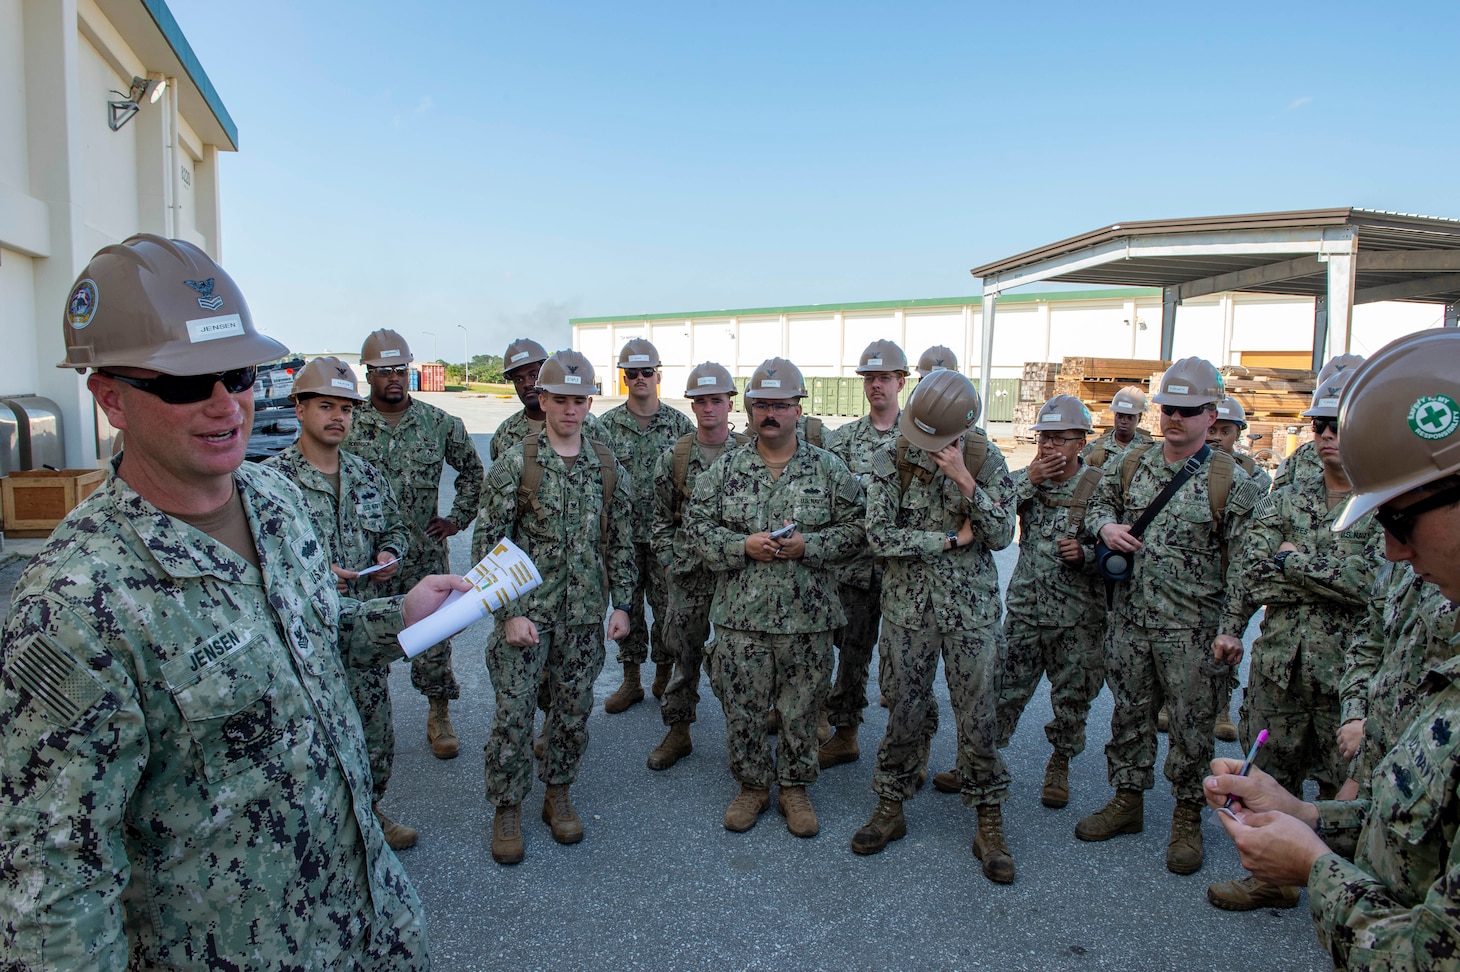 OKINAWA, Japan (Dec. 16, 2019) Construction Mechanic 1st Class Edwin Jensen, deployed with Naval Mobile Construction Battalion (NMCB) 5, issues the watch bill prior to receiving simulated orders during a 48-hour Mount-Out Exercise (MOX) on board Camp Shields, Okinawa. This exercise tests the battalion’s ability to deploy 89 personnel and 35-45 pieces of civil engineer support equipment within 48-hours to support major combat operations or humanitarian aid/disaster relief. NMCB-5 is deployed across the Indo-Pacific region conducting high-quality construction to support U.S. and partner nations to strengthen partnerships, deter aggression, and enable expeditionary logistics and naval power projection.